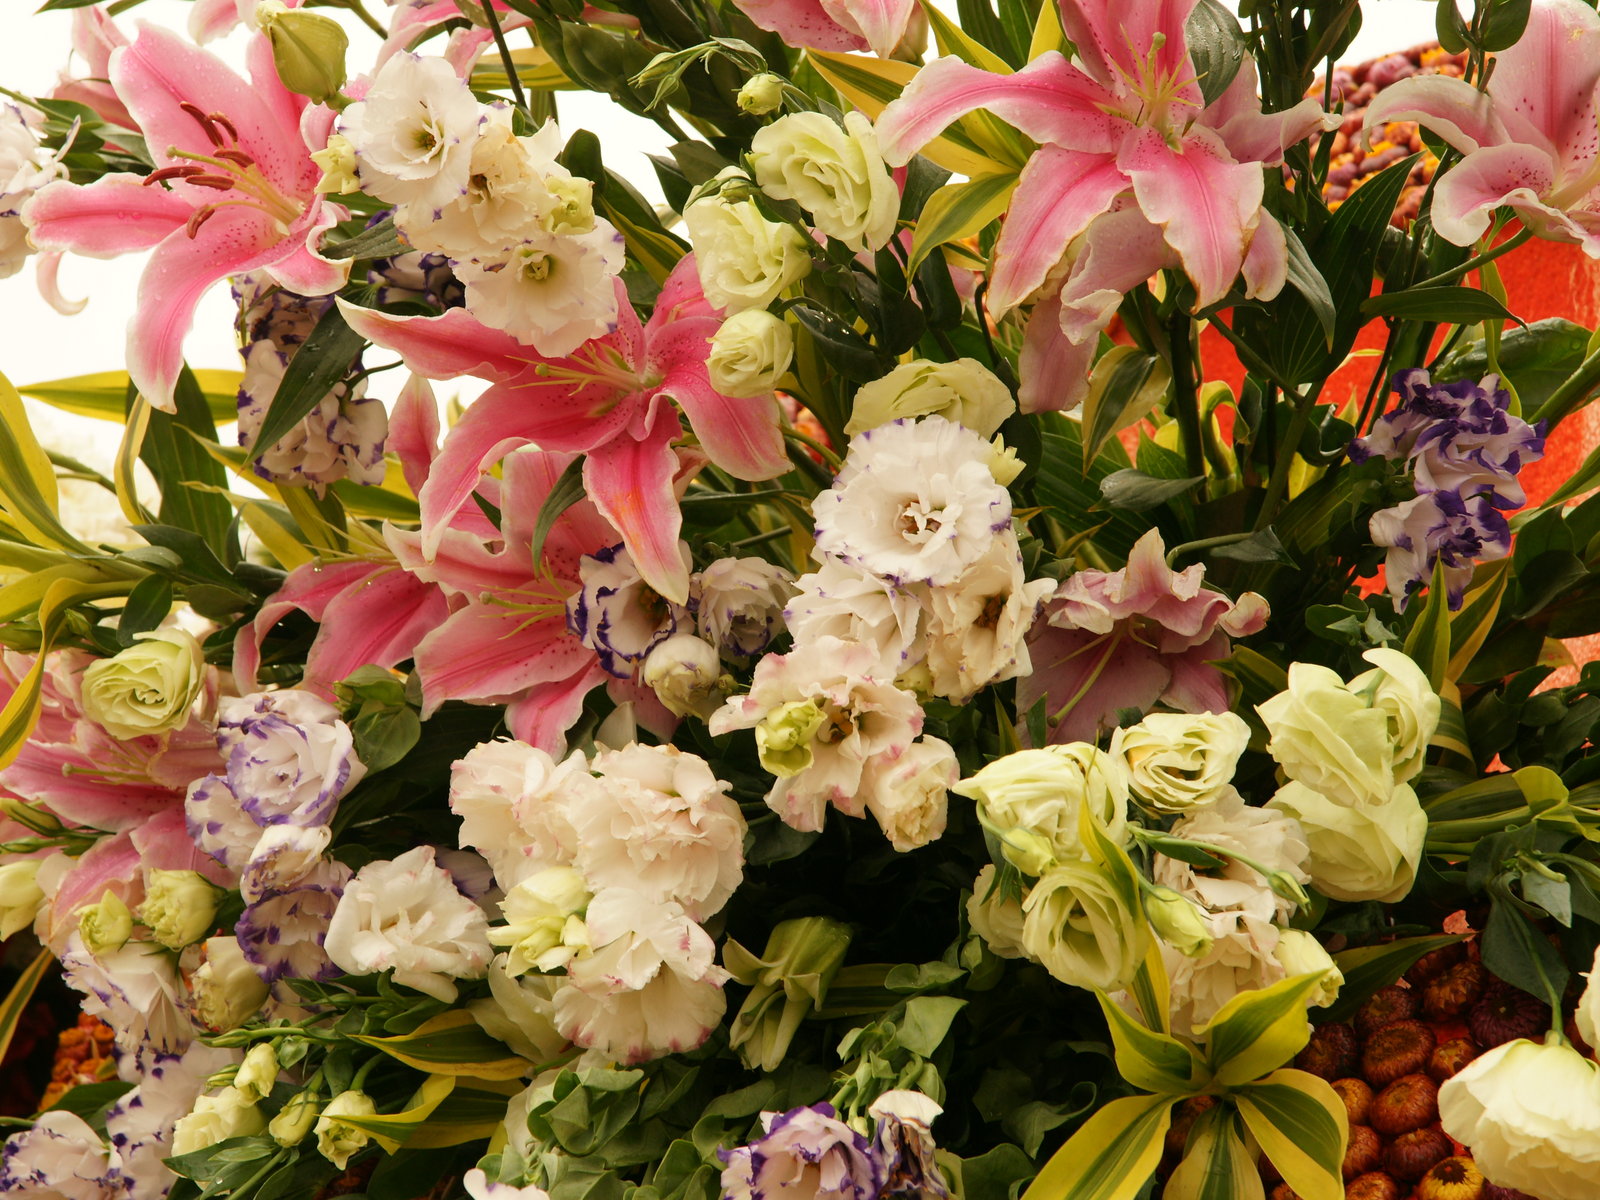 Flower Arrangement With Pink Stargazer And Tropical Beautiful Flowers